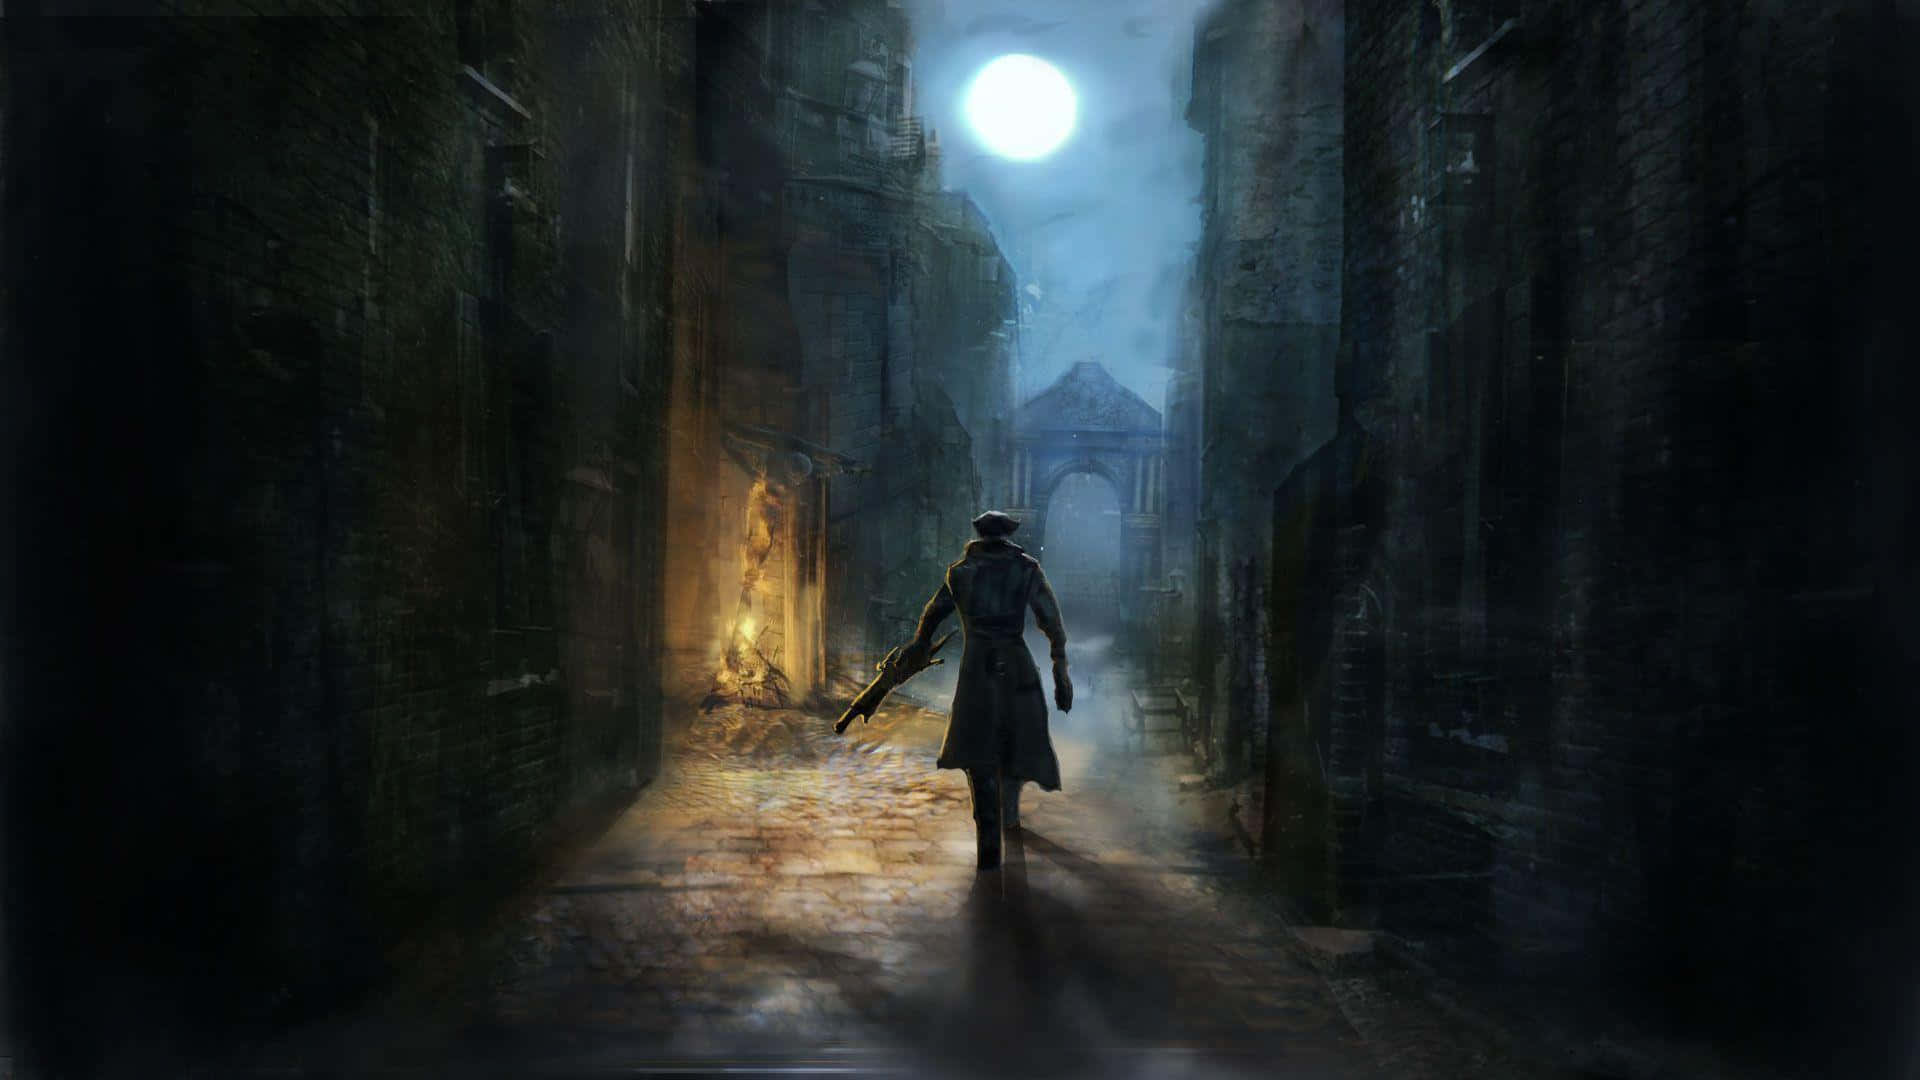 The Hunter amidst the haunting world of Bloodborne